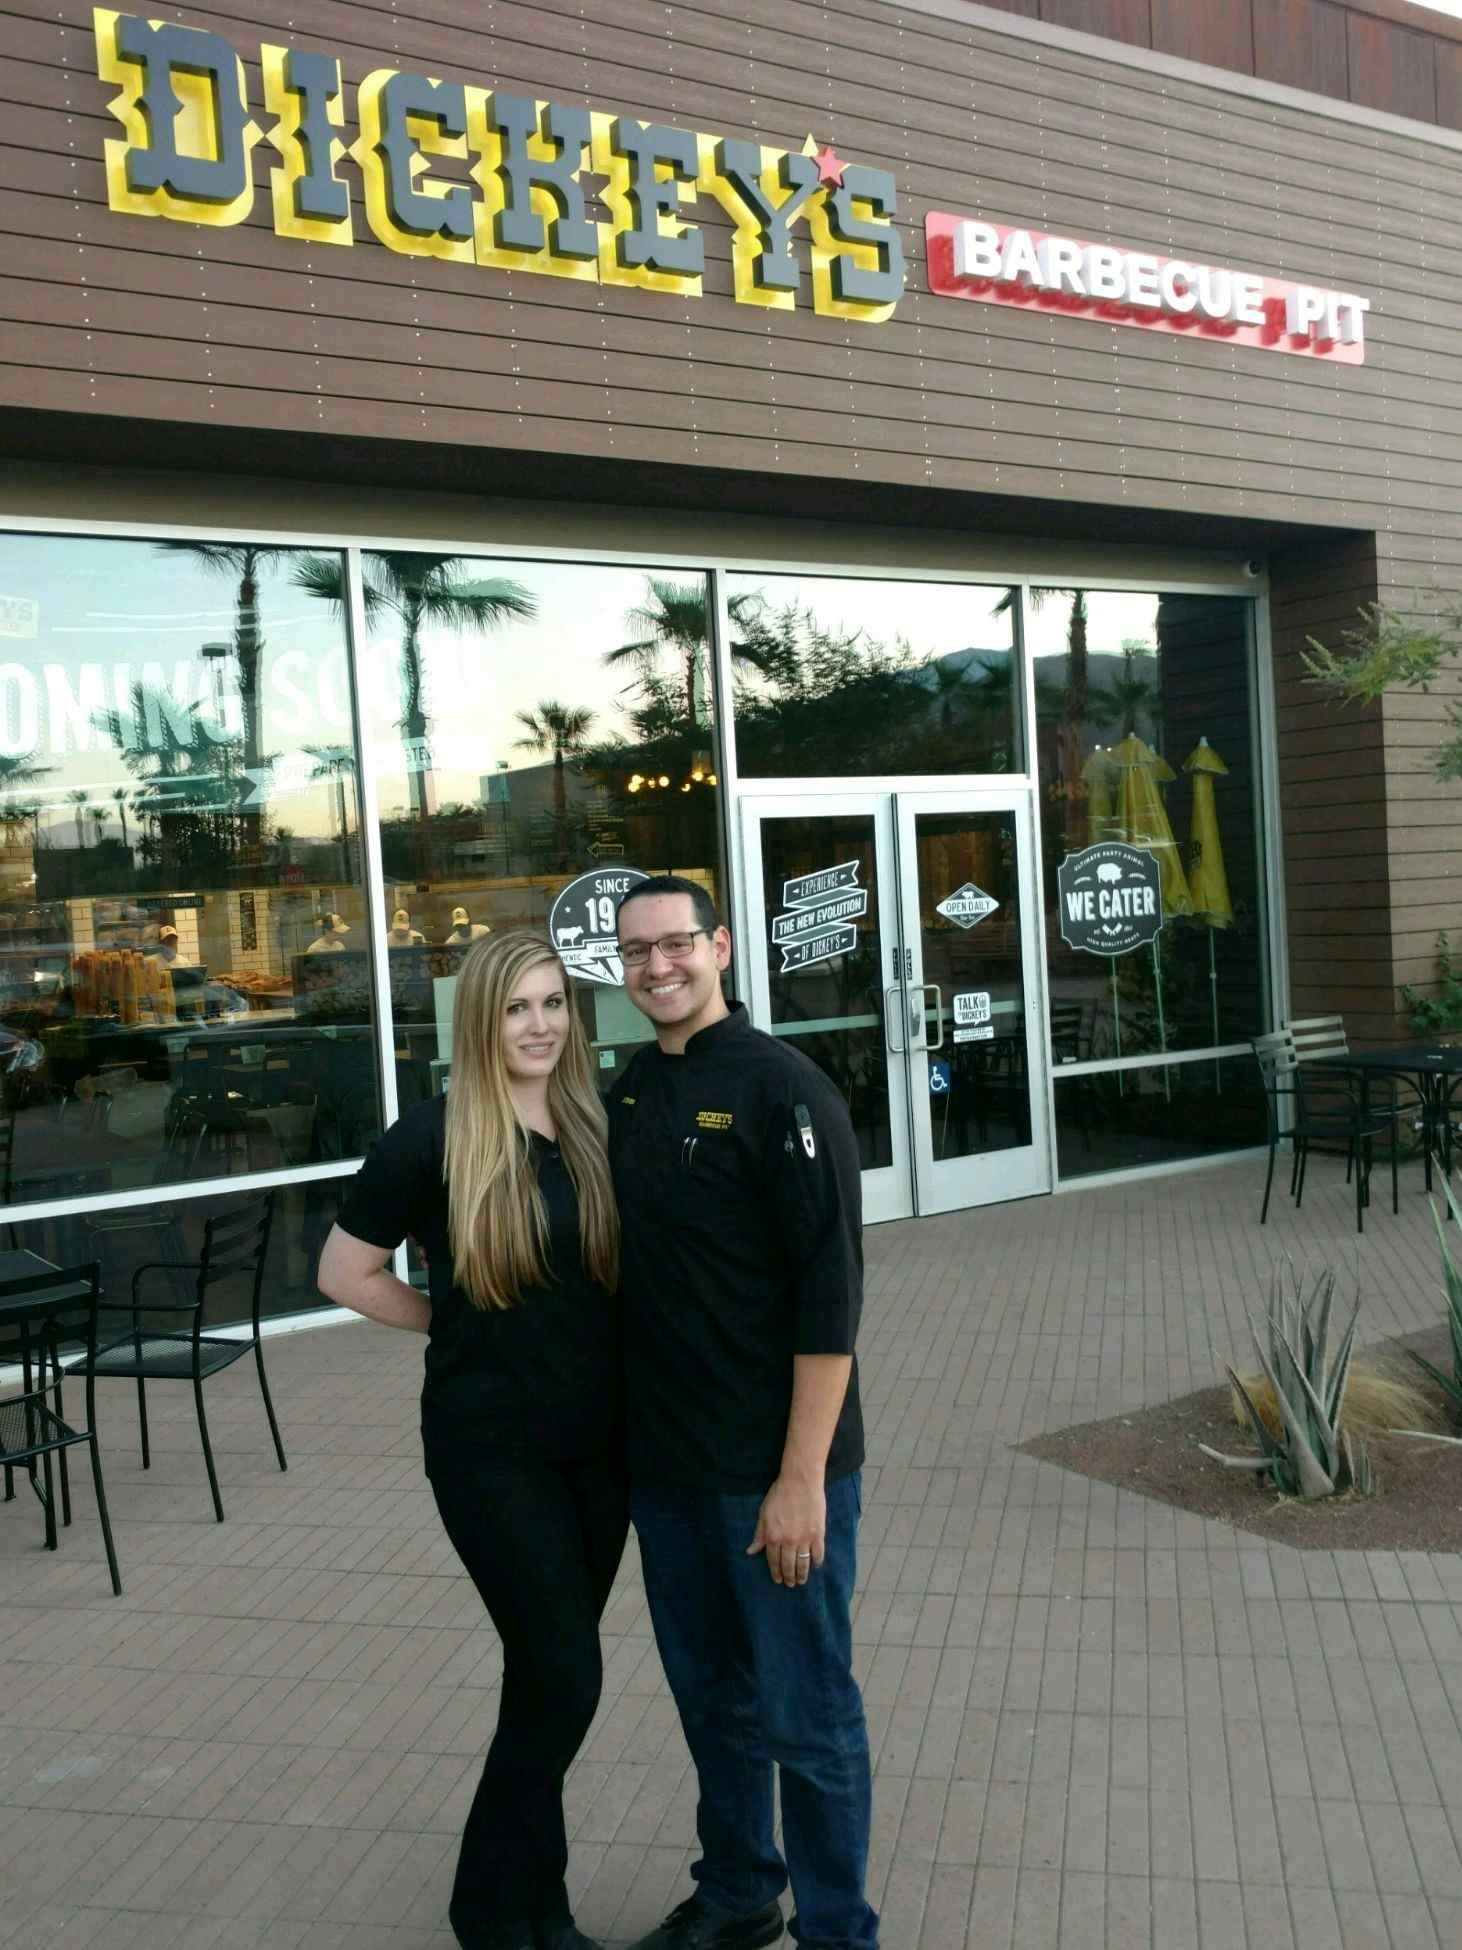 The Desert Sun: A new Dickey's Barbecue Pit opens in Rancho Mirage this week and you could win free food for a year